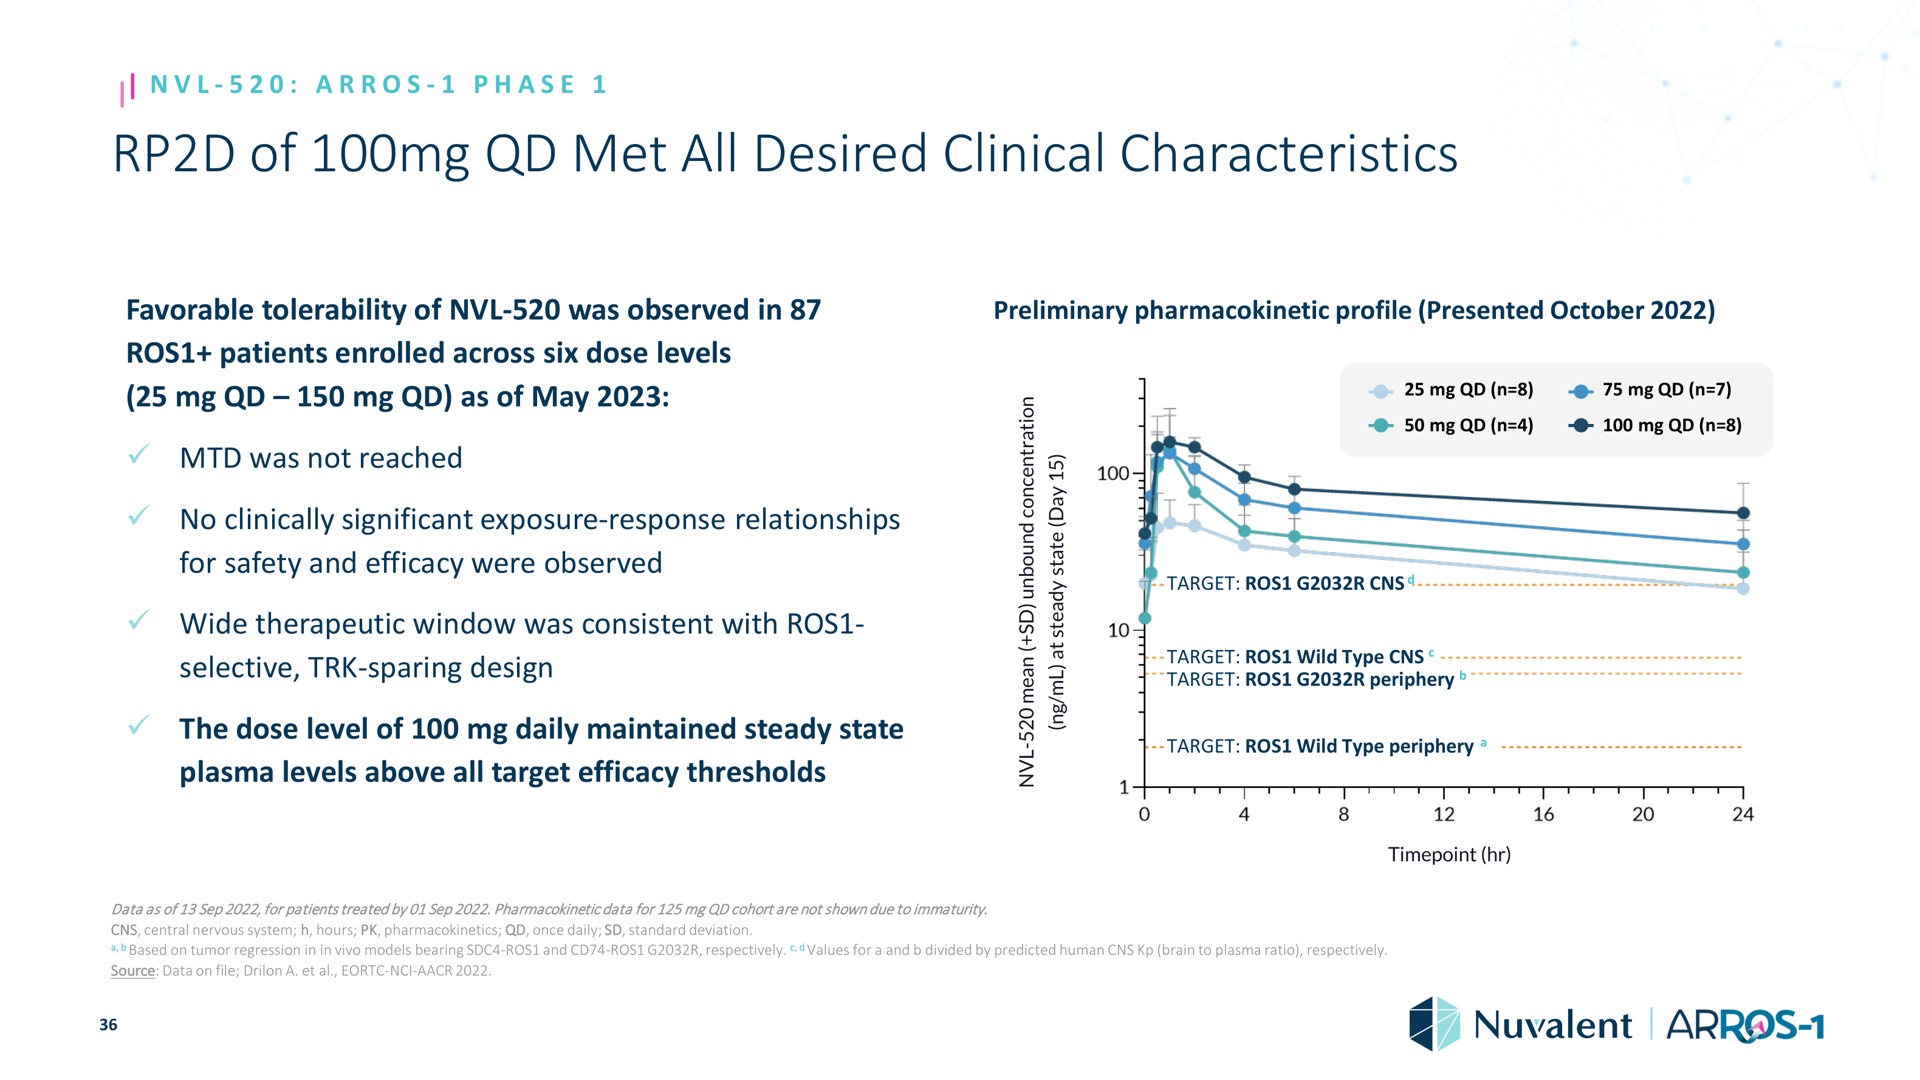 of met all desired clinical characteristics phase favorable tolerability was observed in preliminary profile presented patients enrolled across six dose levels as may was not reached no clinically significant exposure response relationships for safety and efficacy were observed wide therapeutic window was consistent with selective sparing design the dose level daily maintained steady state plasma levels above target efficacy thresholds i a a a a a a target target wild type target periphery target wild type periphery data as for patients treated by data for cohort are not shown due to immaturity central nervous system standard deviation hours once daily in models in and respectively based on tumor reg on source data on file a i values for a and divided by predicted human brain to plasma ratio respectively | Nuvalent